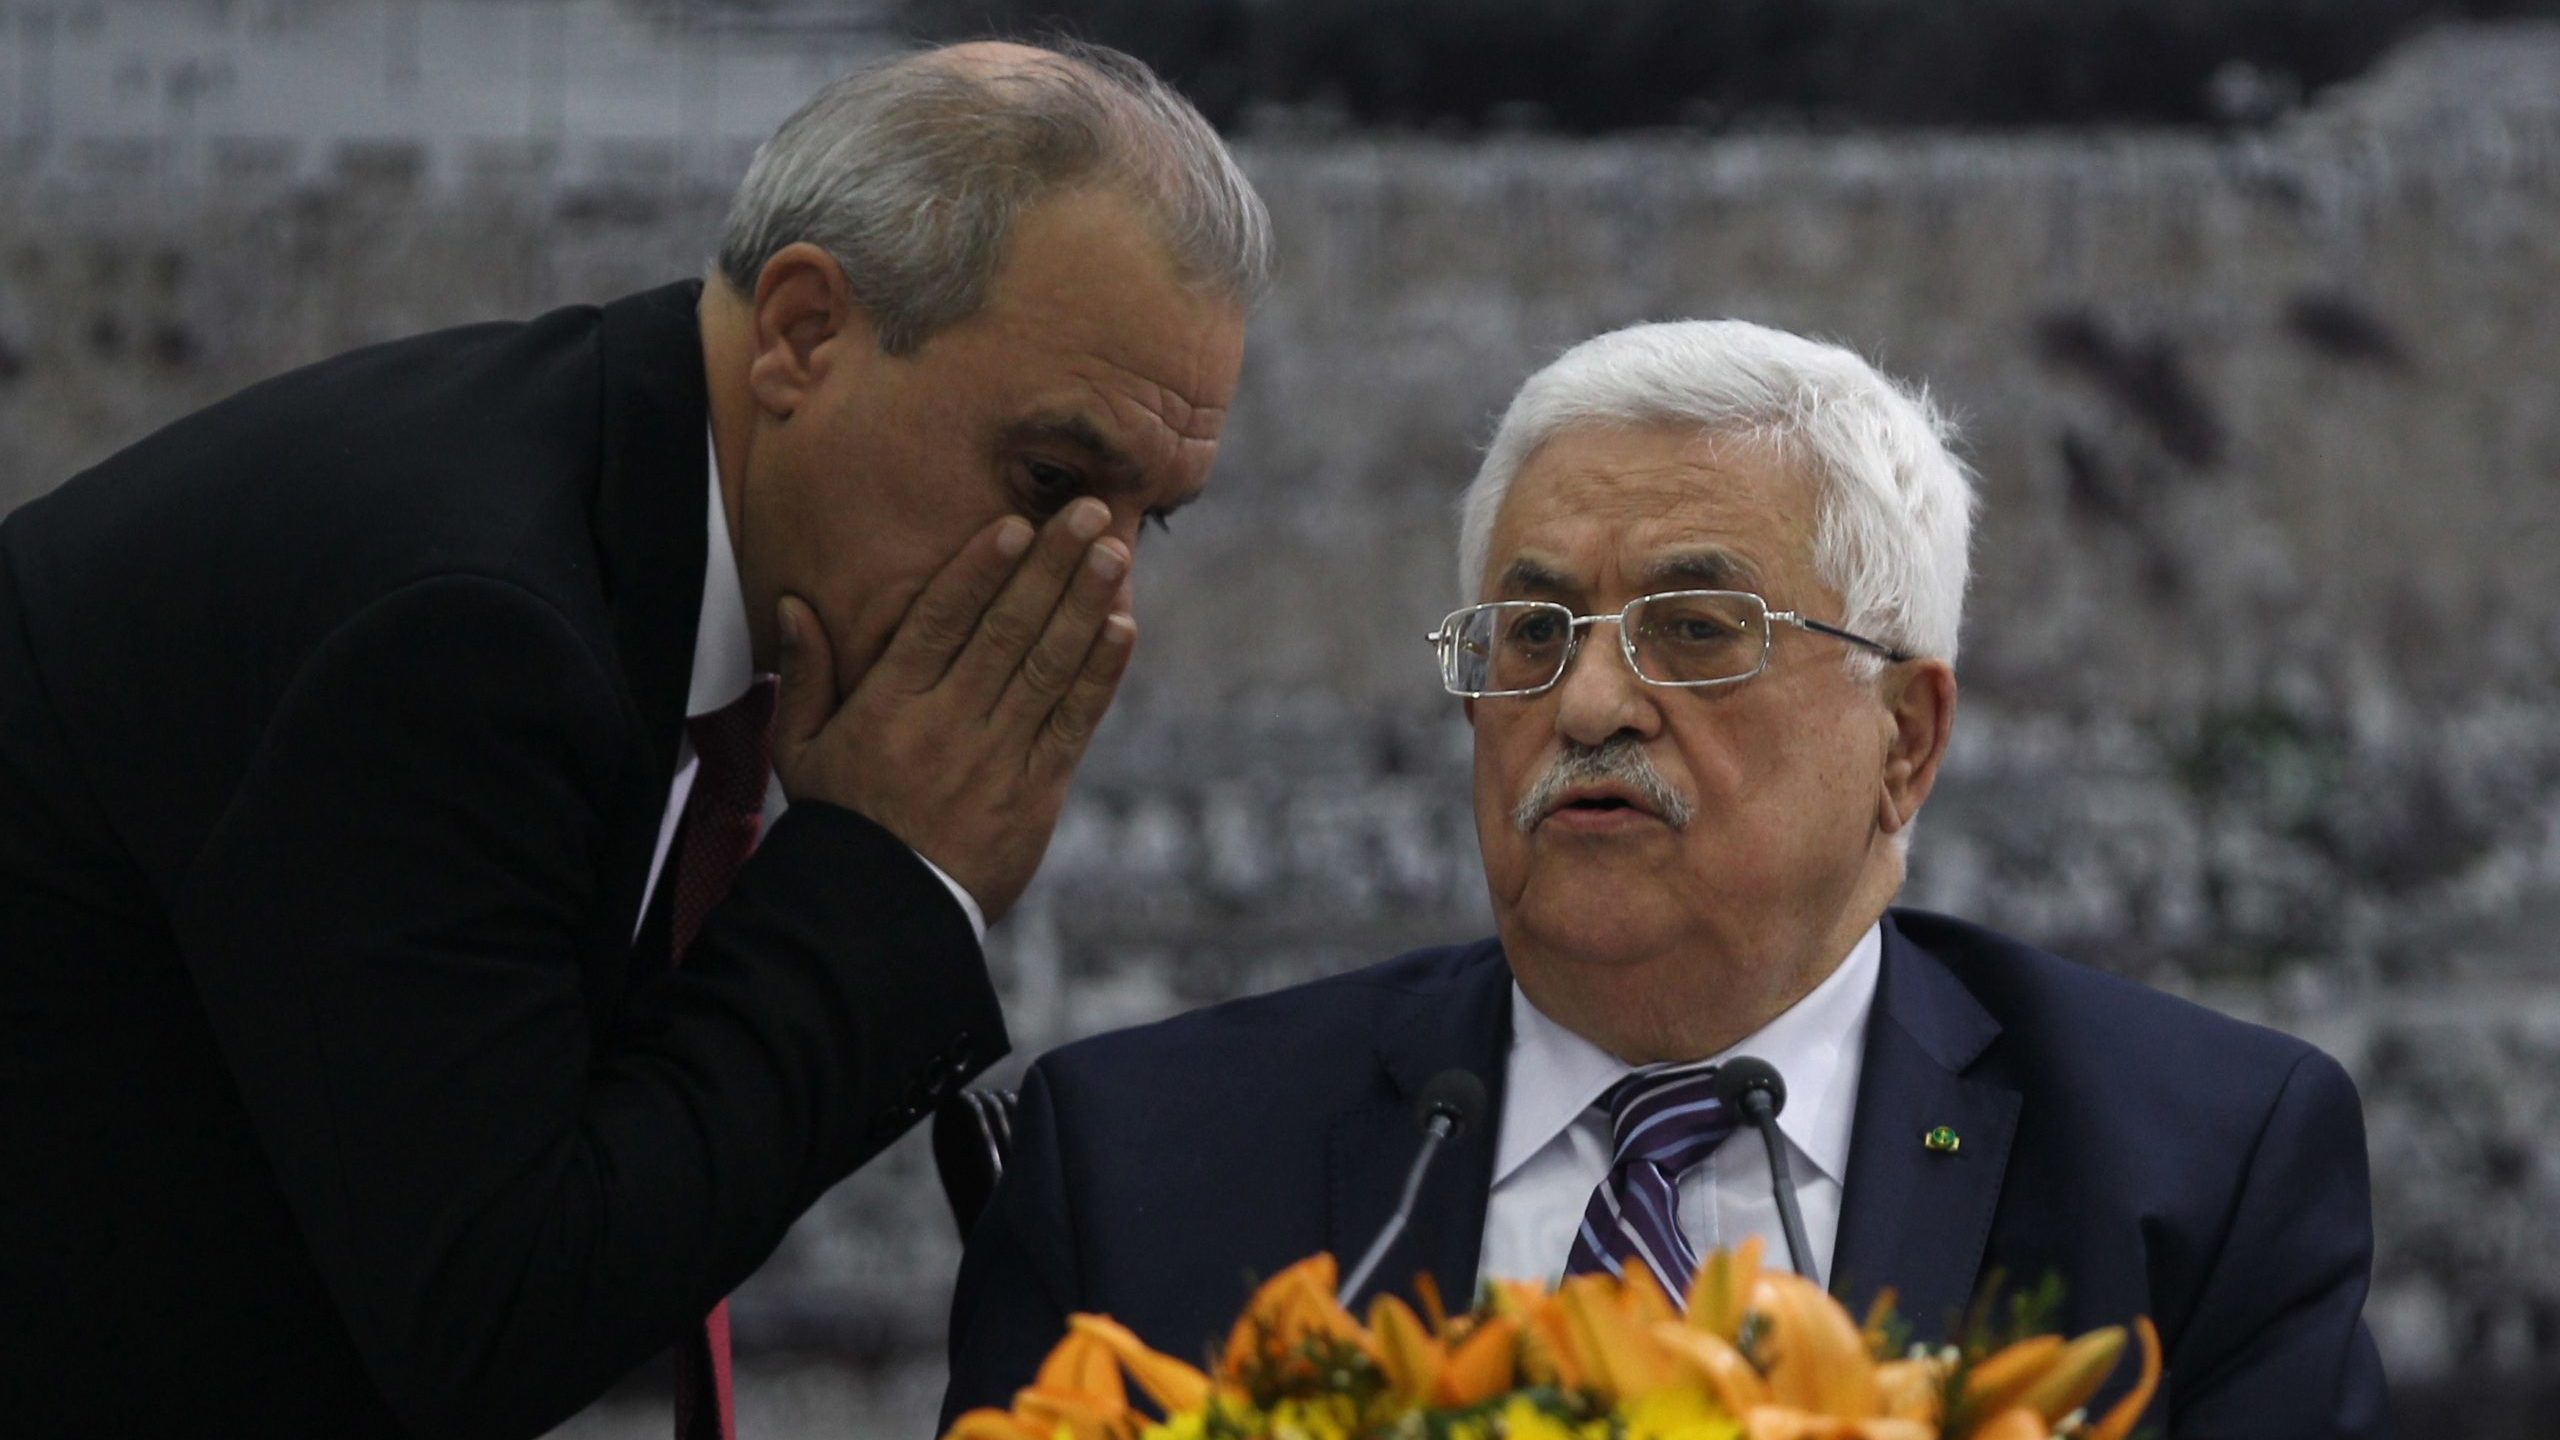 Palestinian Elections Are Attempt to Settle Political Landscape